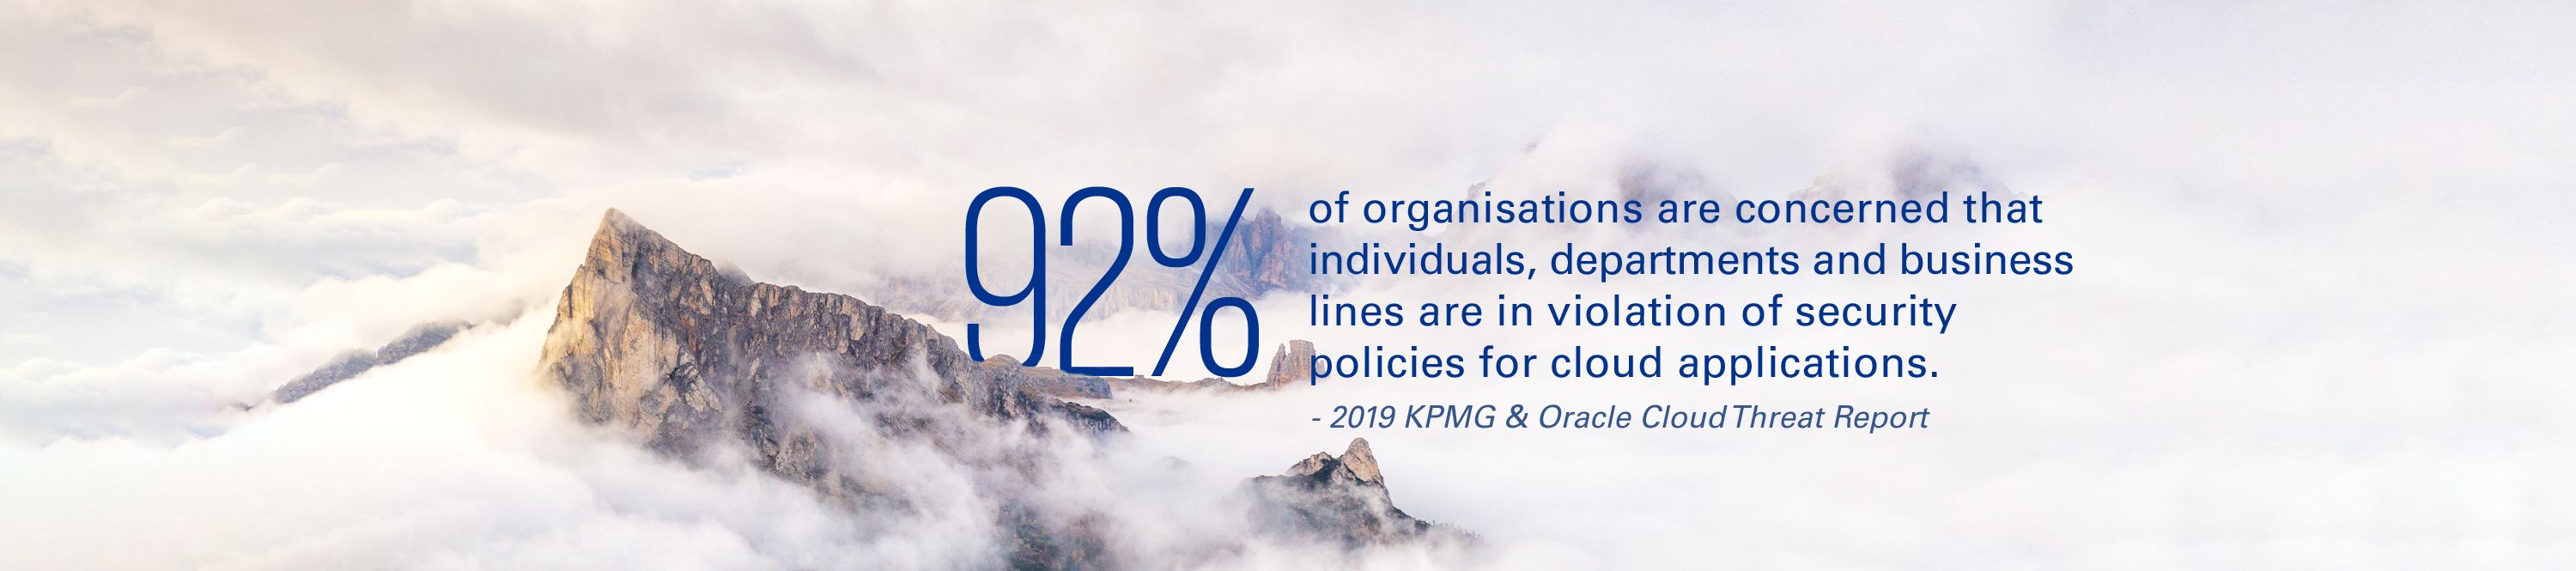 2019 KPMG & Oracle Cloud Threat Report quote